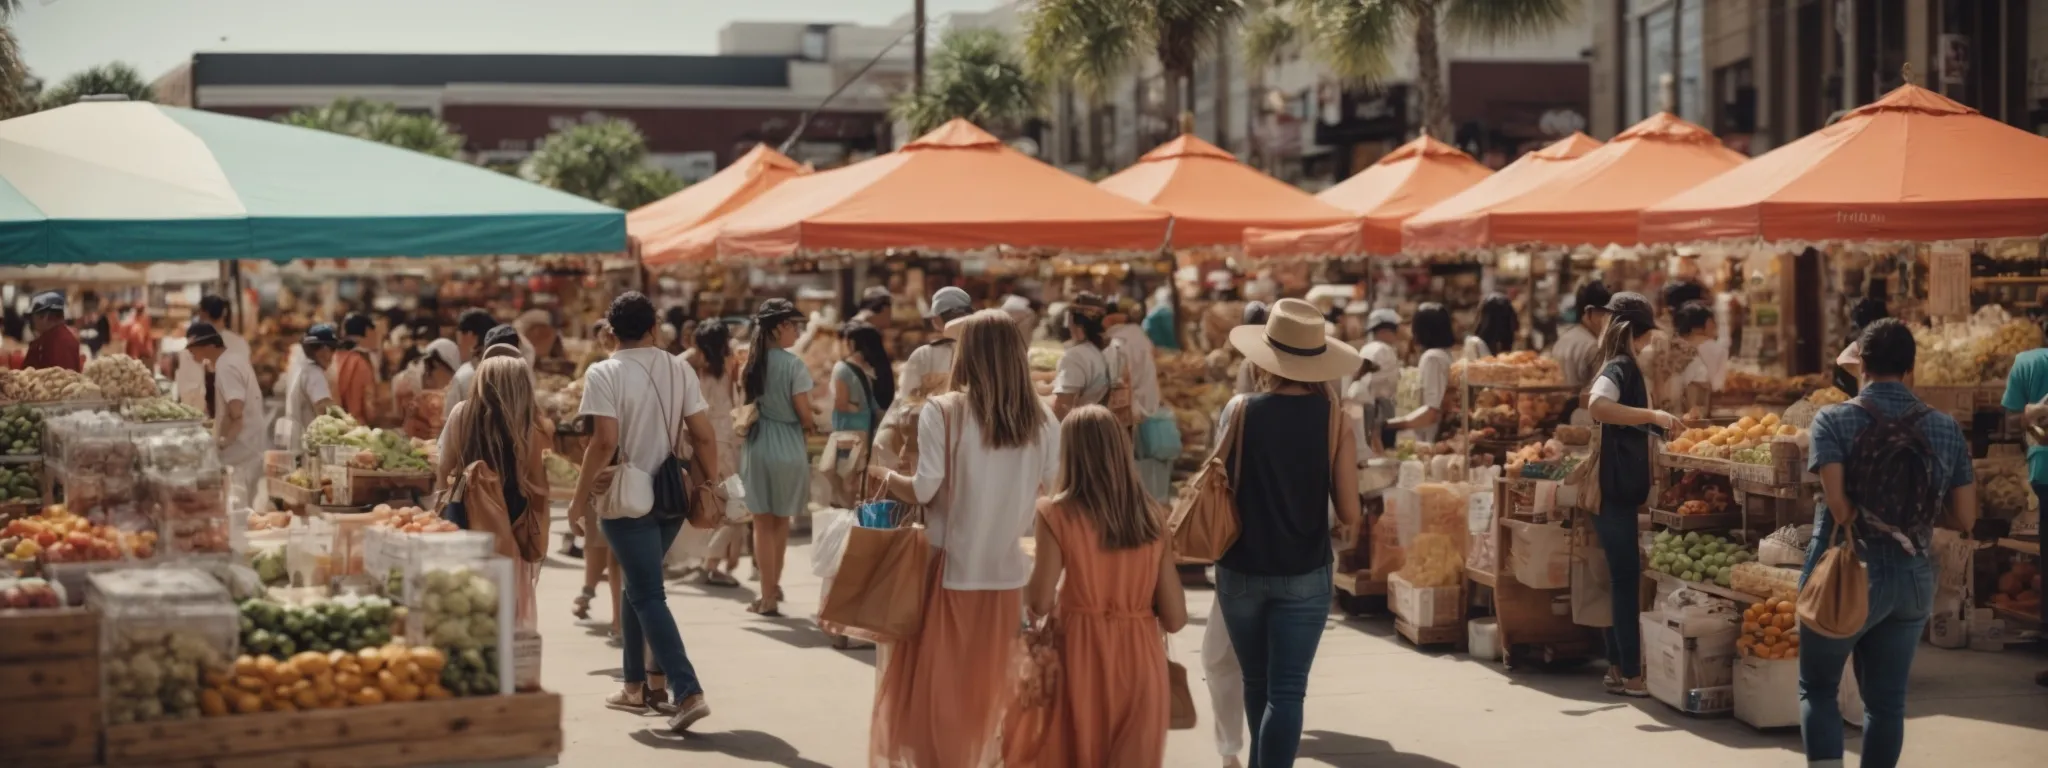 people shopping in a vibrant jacksonville marketplace engaging with local products on a sunny day.